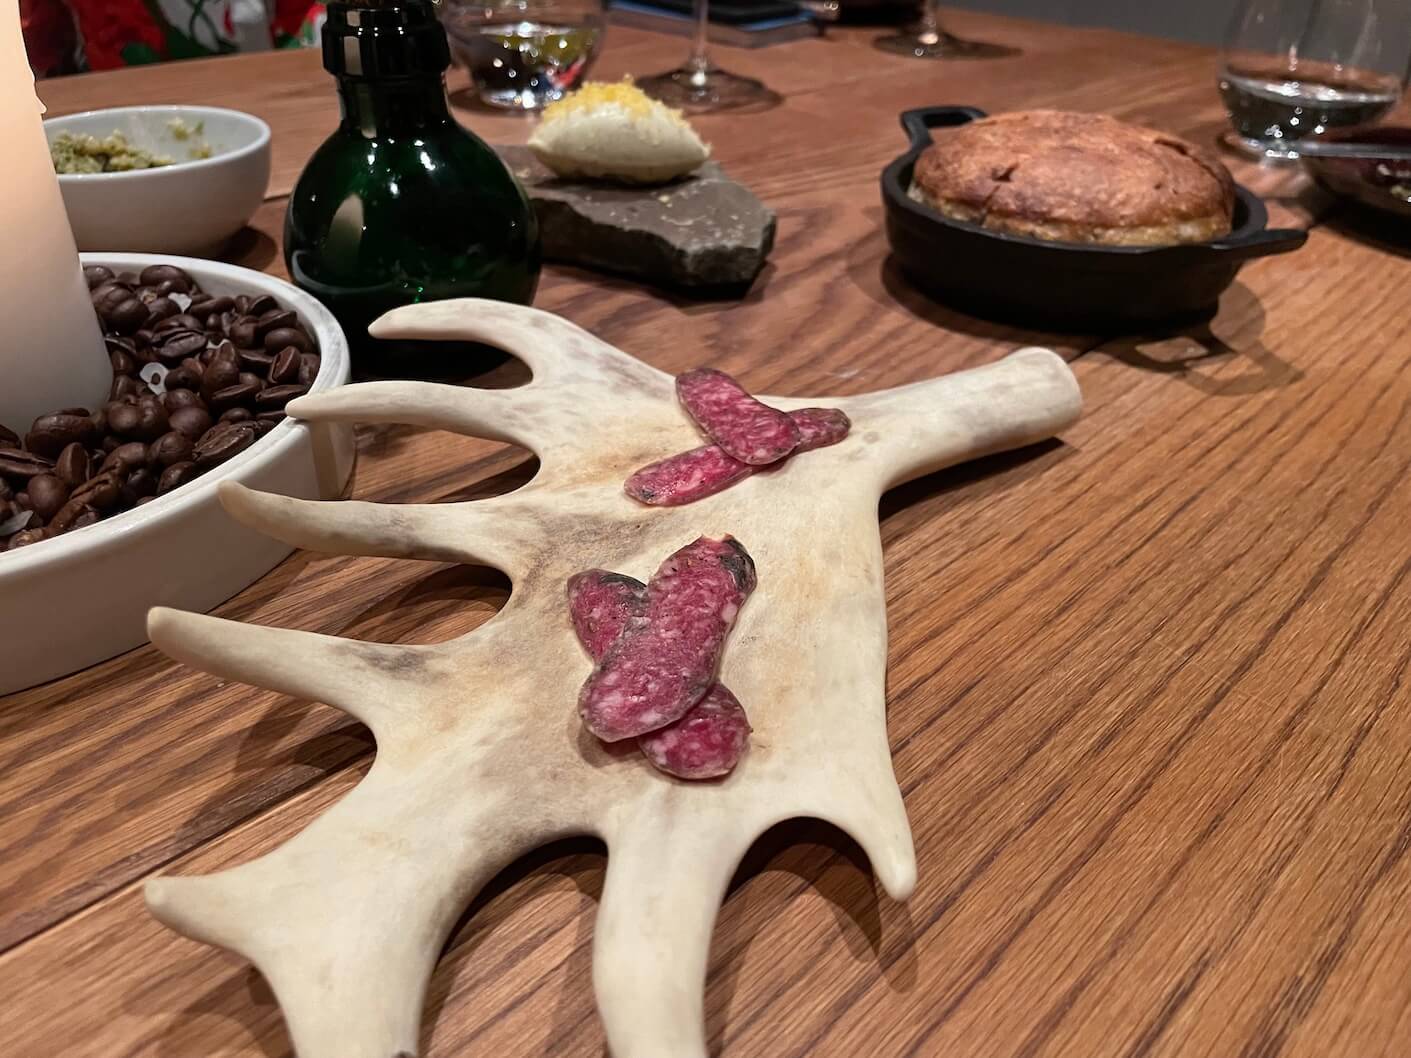 Reindeer charcuterie was served on an antler dish at Huset